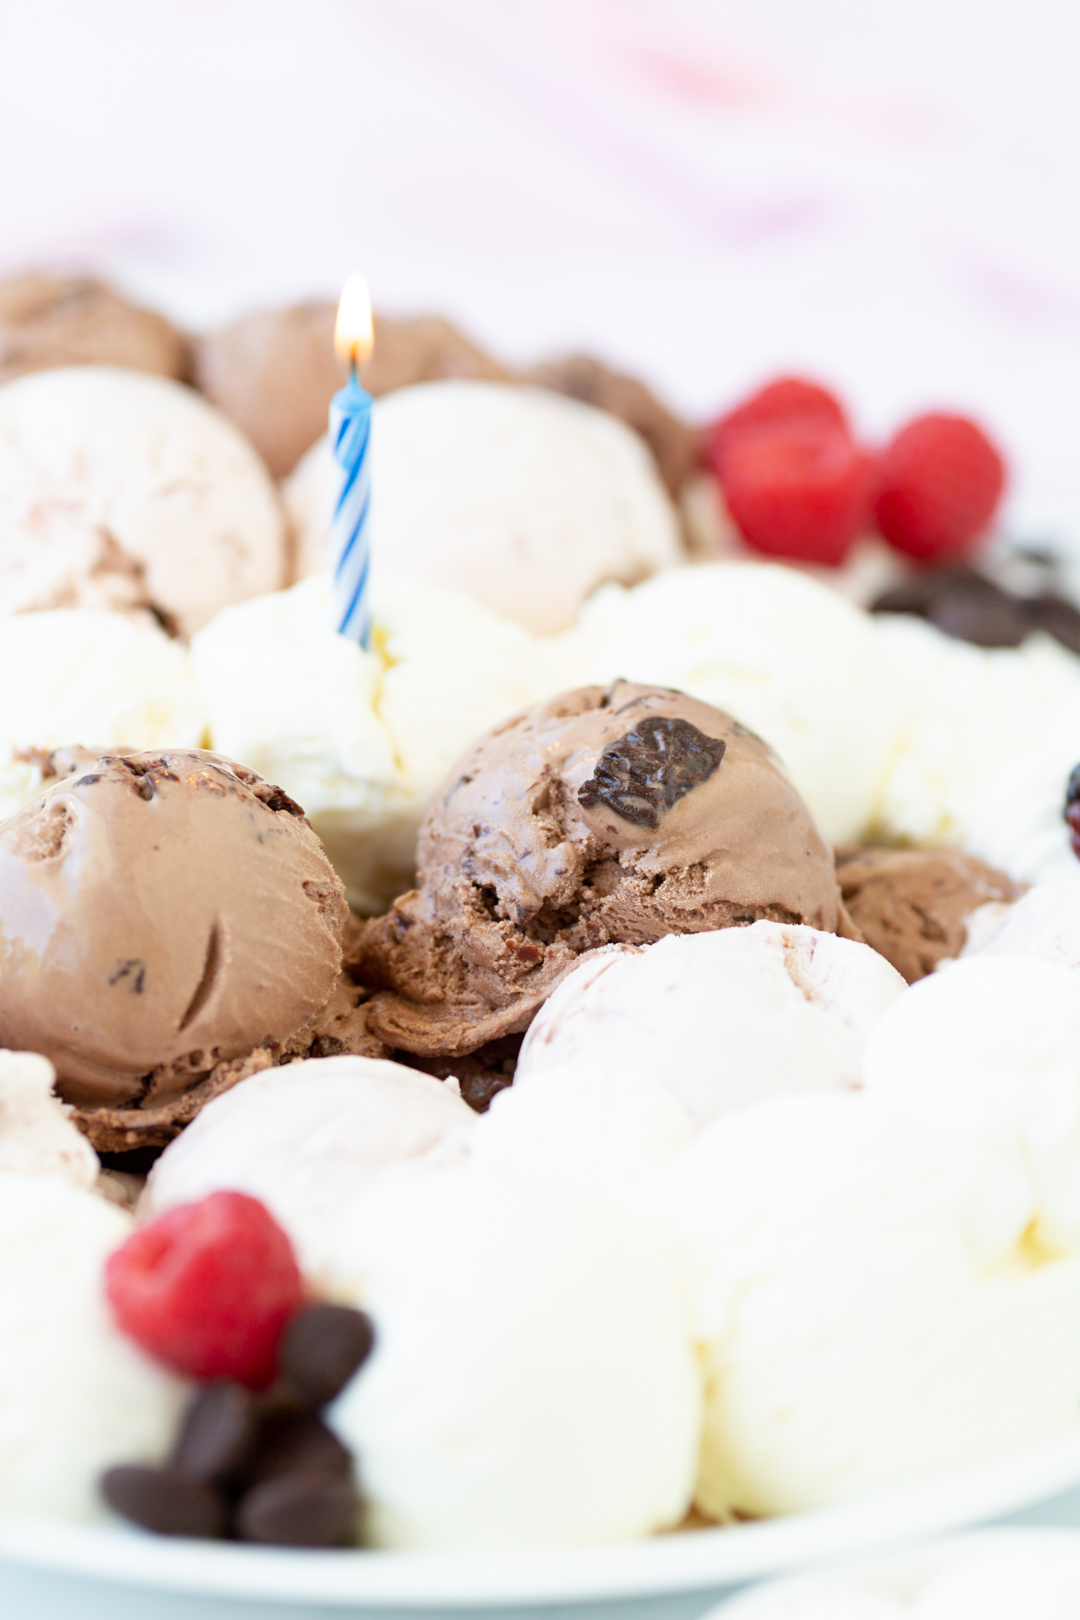 scoops of ice cream with a lit birthday candle on top to celebrate. cake alternative.